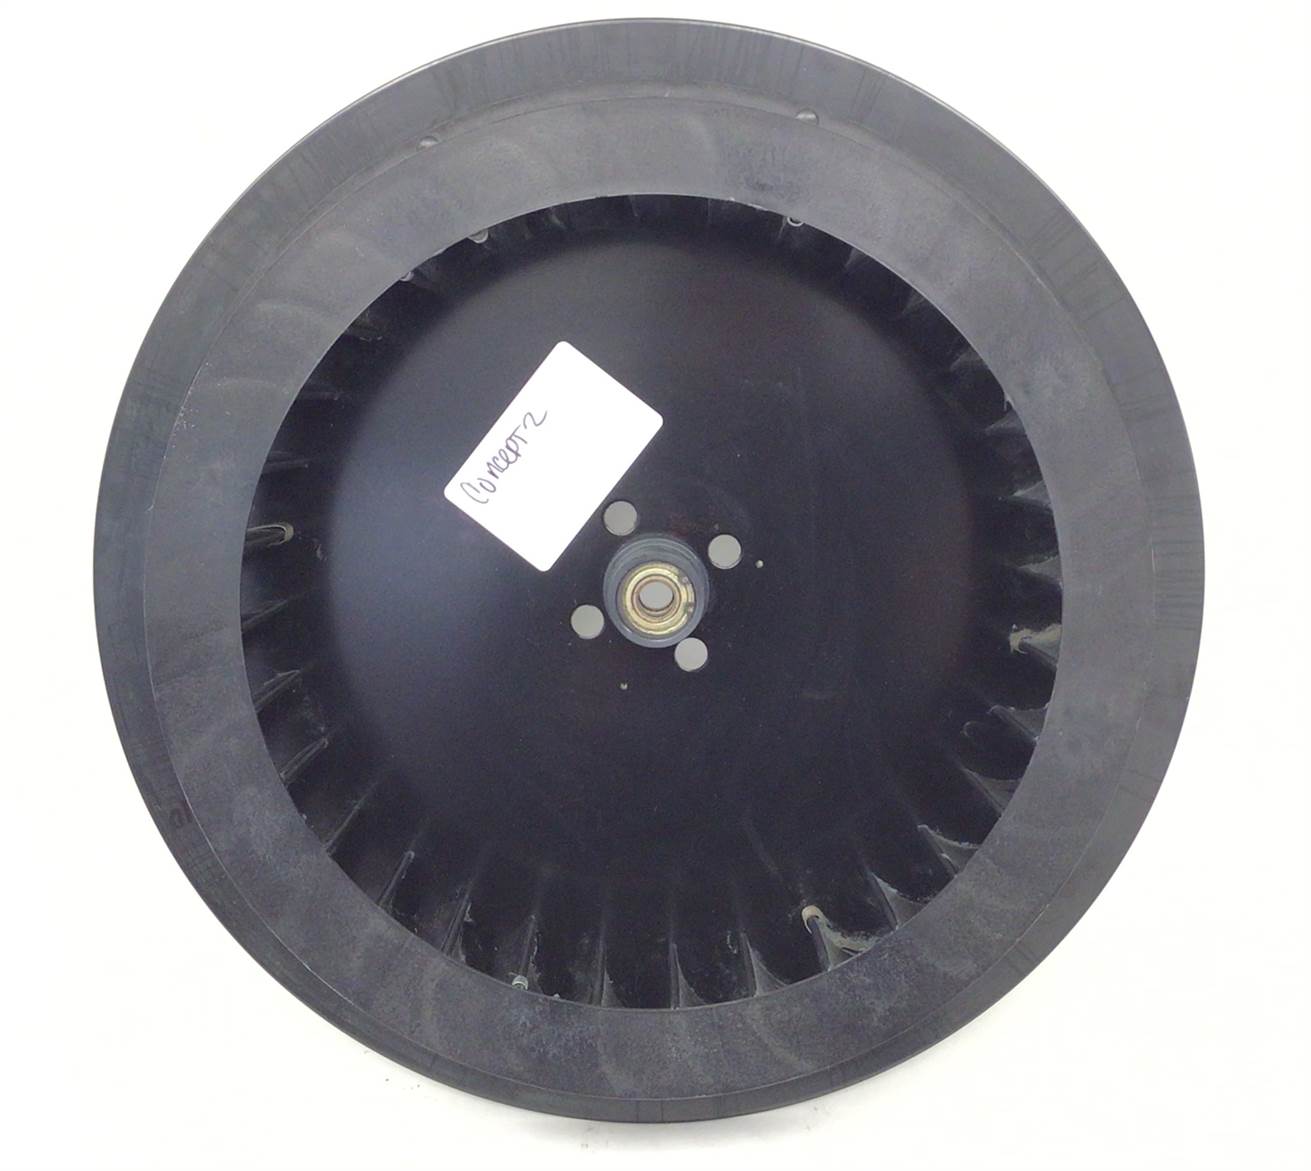 Flywheel Assembly (machine made 10/30/06 or later) (Used)